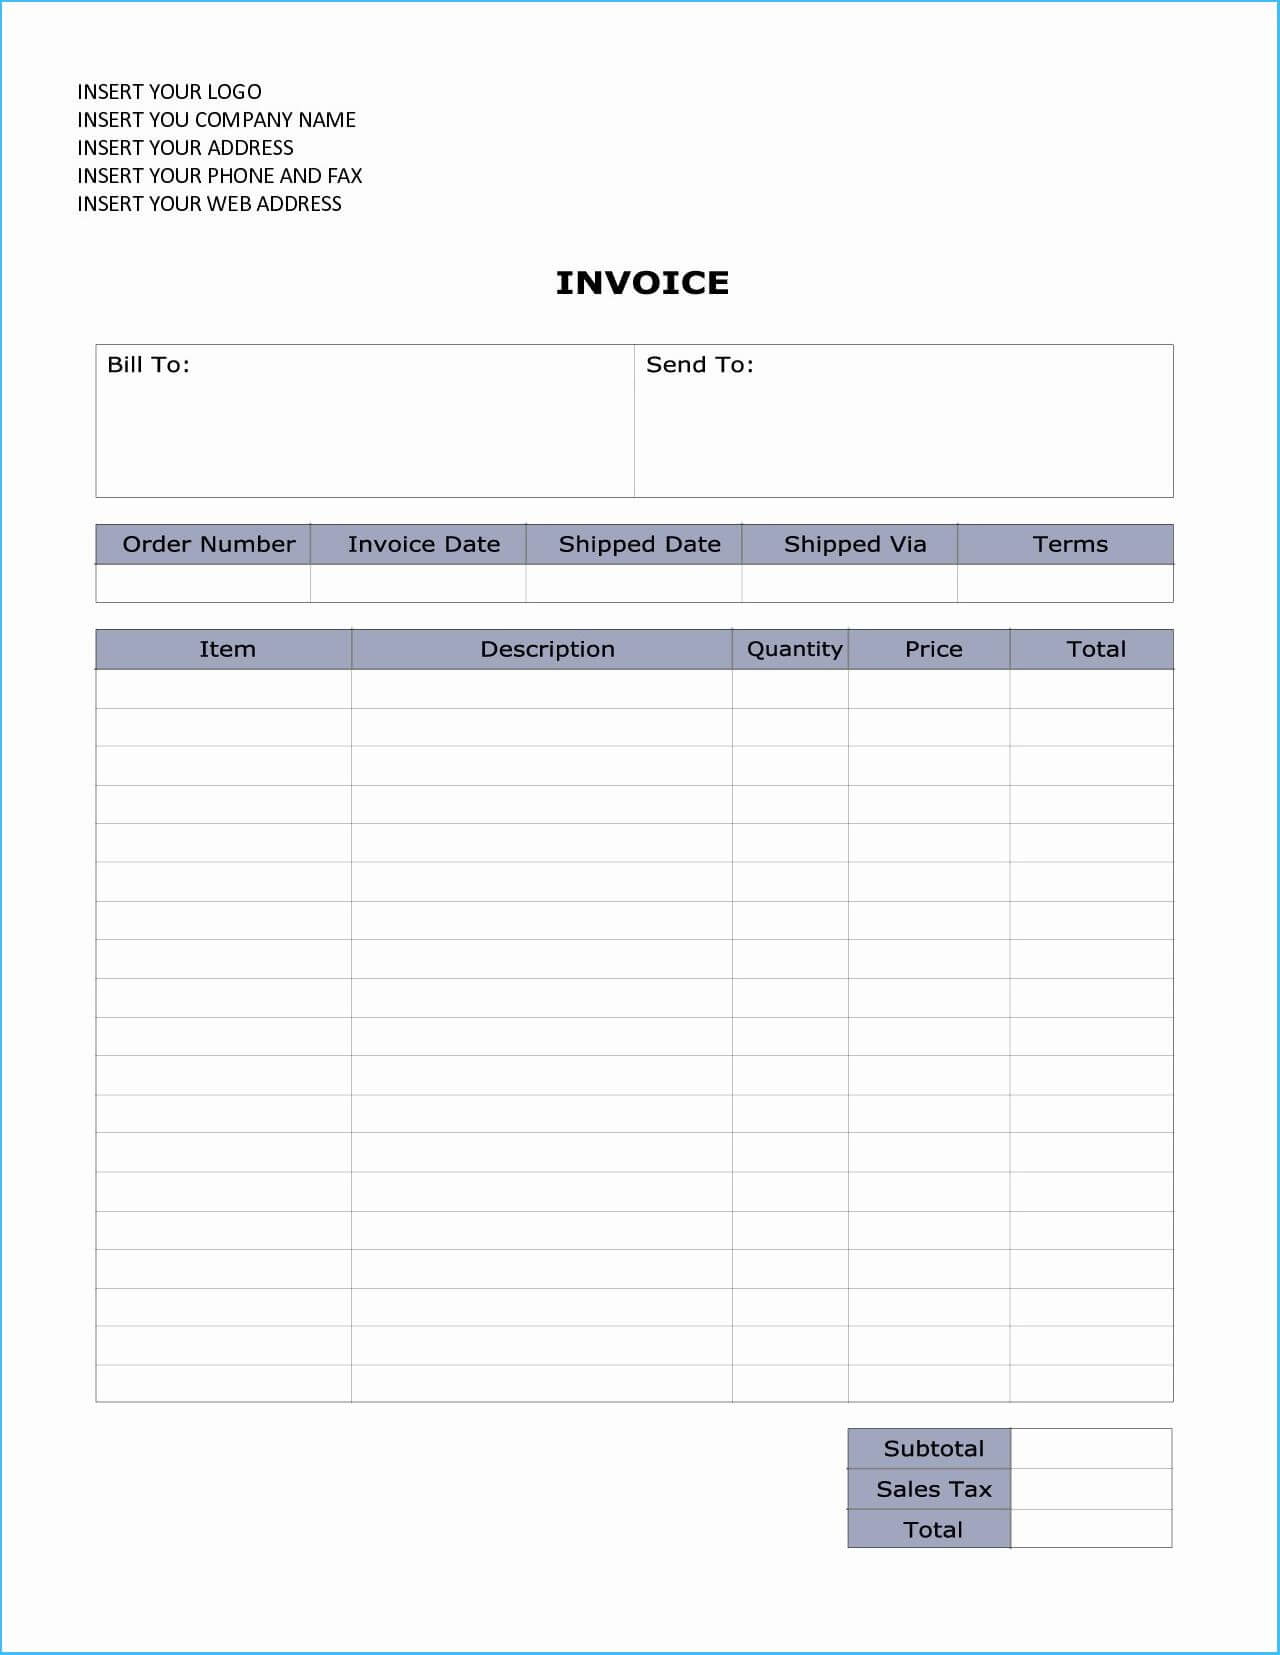 Awesome Invoice Template Word 2010 As An Extra Ideas About With Regard To Invoice Template Word 2010